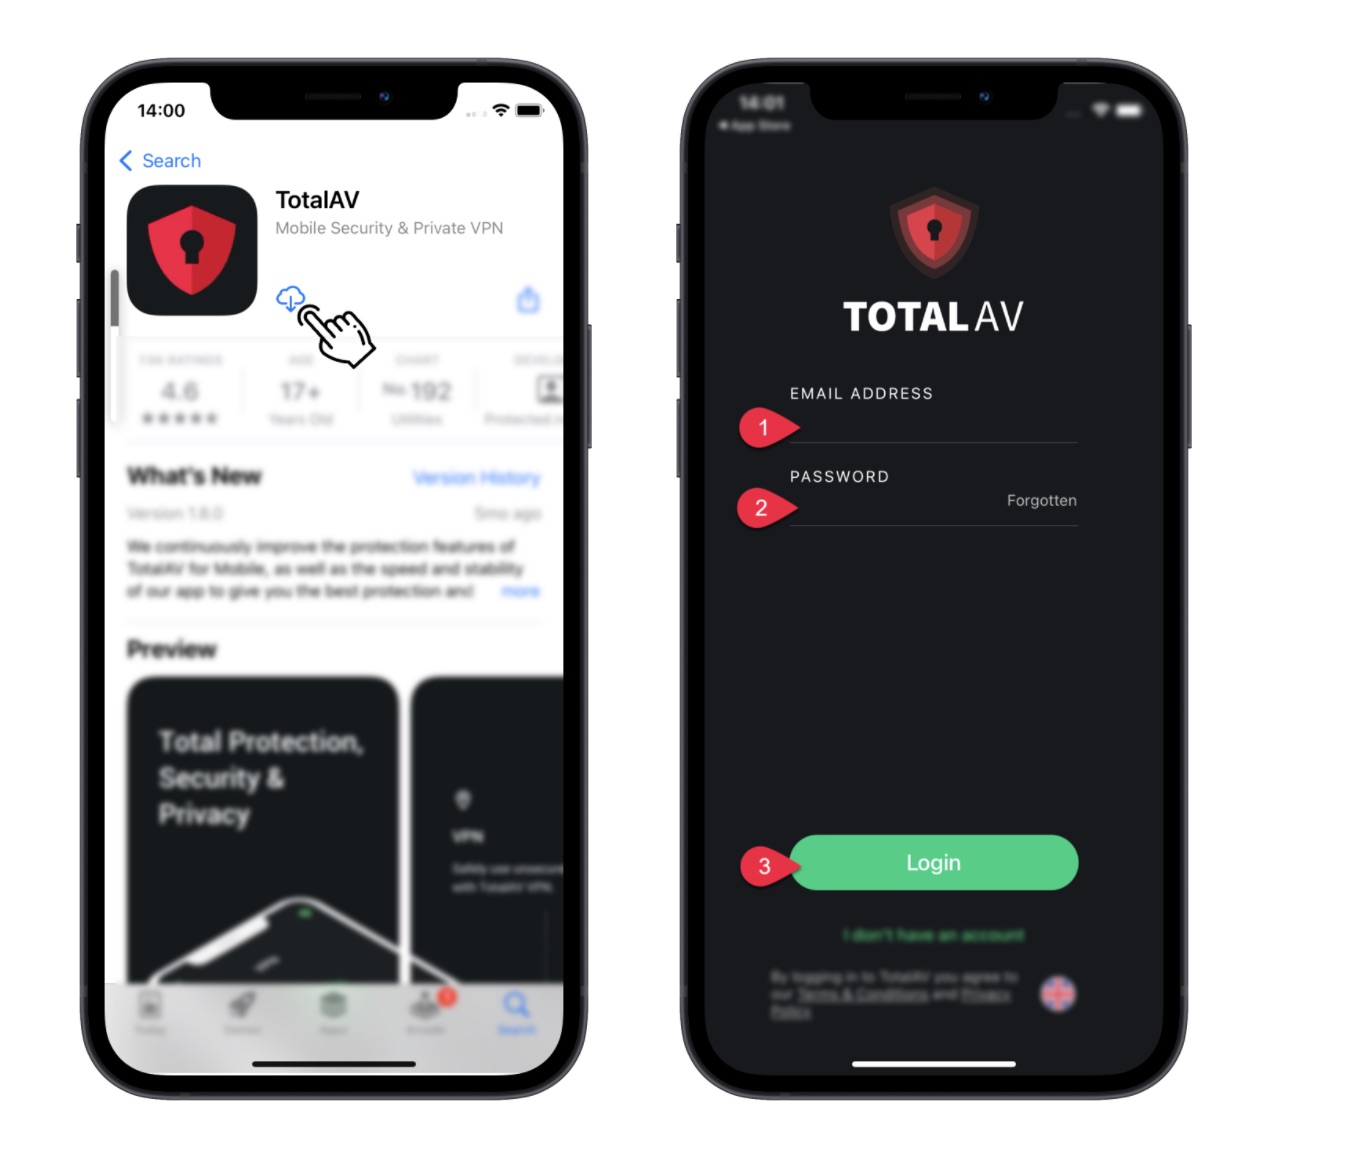 How To Install Totalav On Iphone And Ipad